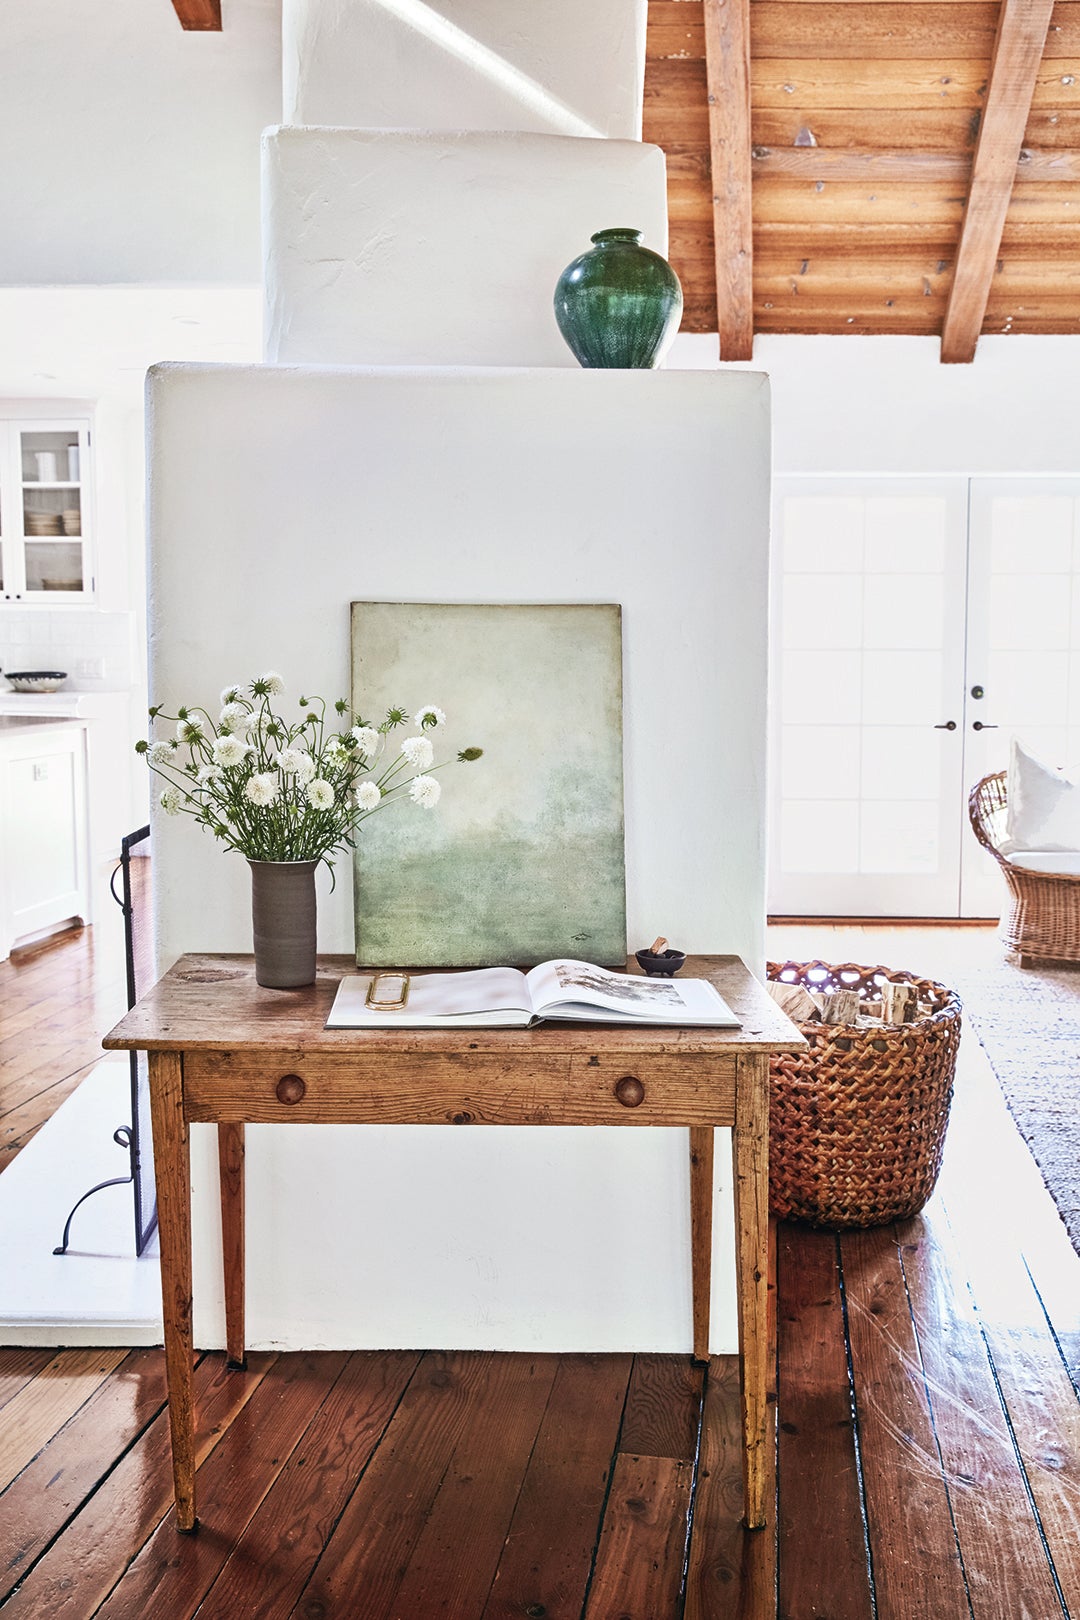 Move Over, Cottagecore: The New Decor Trend Is Coastal Grandmother